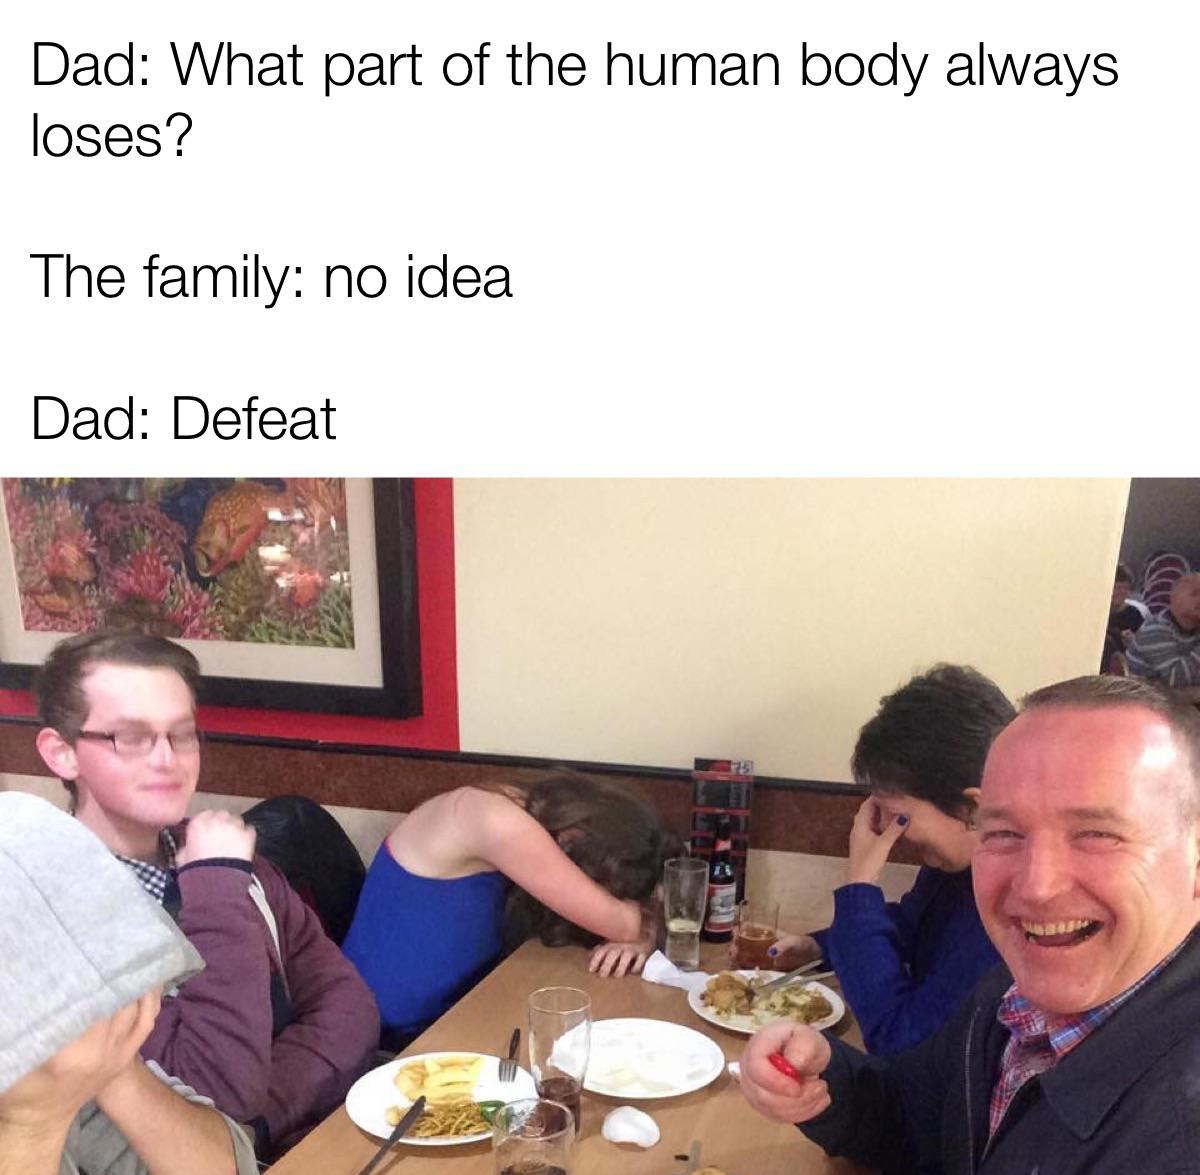 dad joke reaction - Dad What part of the human body always loses? The family no idea Dad Defeat W&N